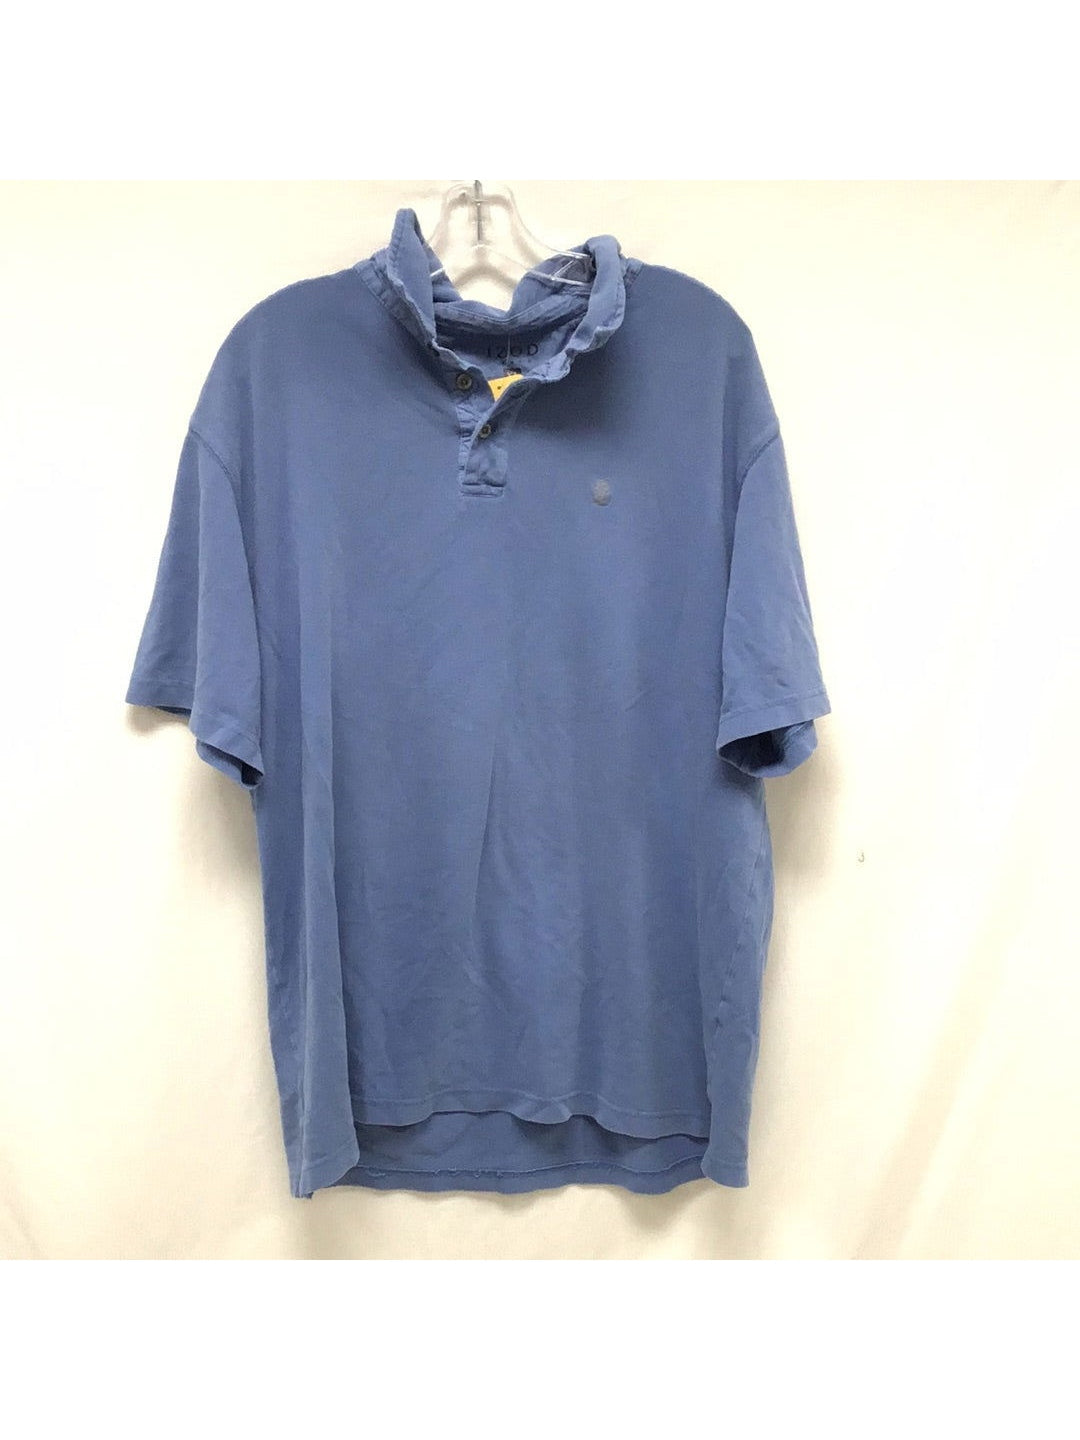 IZOD Men Blue X Large Short Sleeve Shirt - The Kennedy Collective Thrift - 